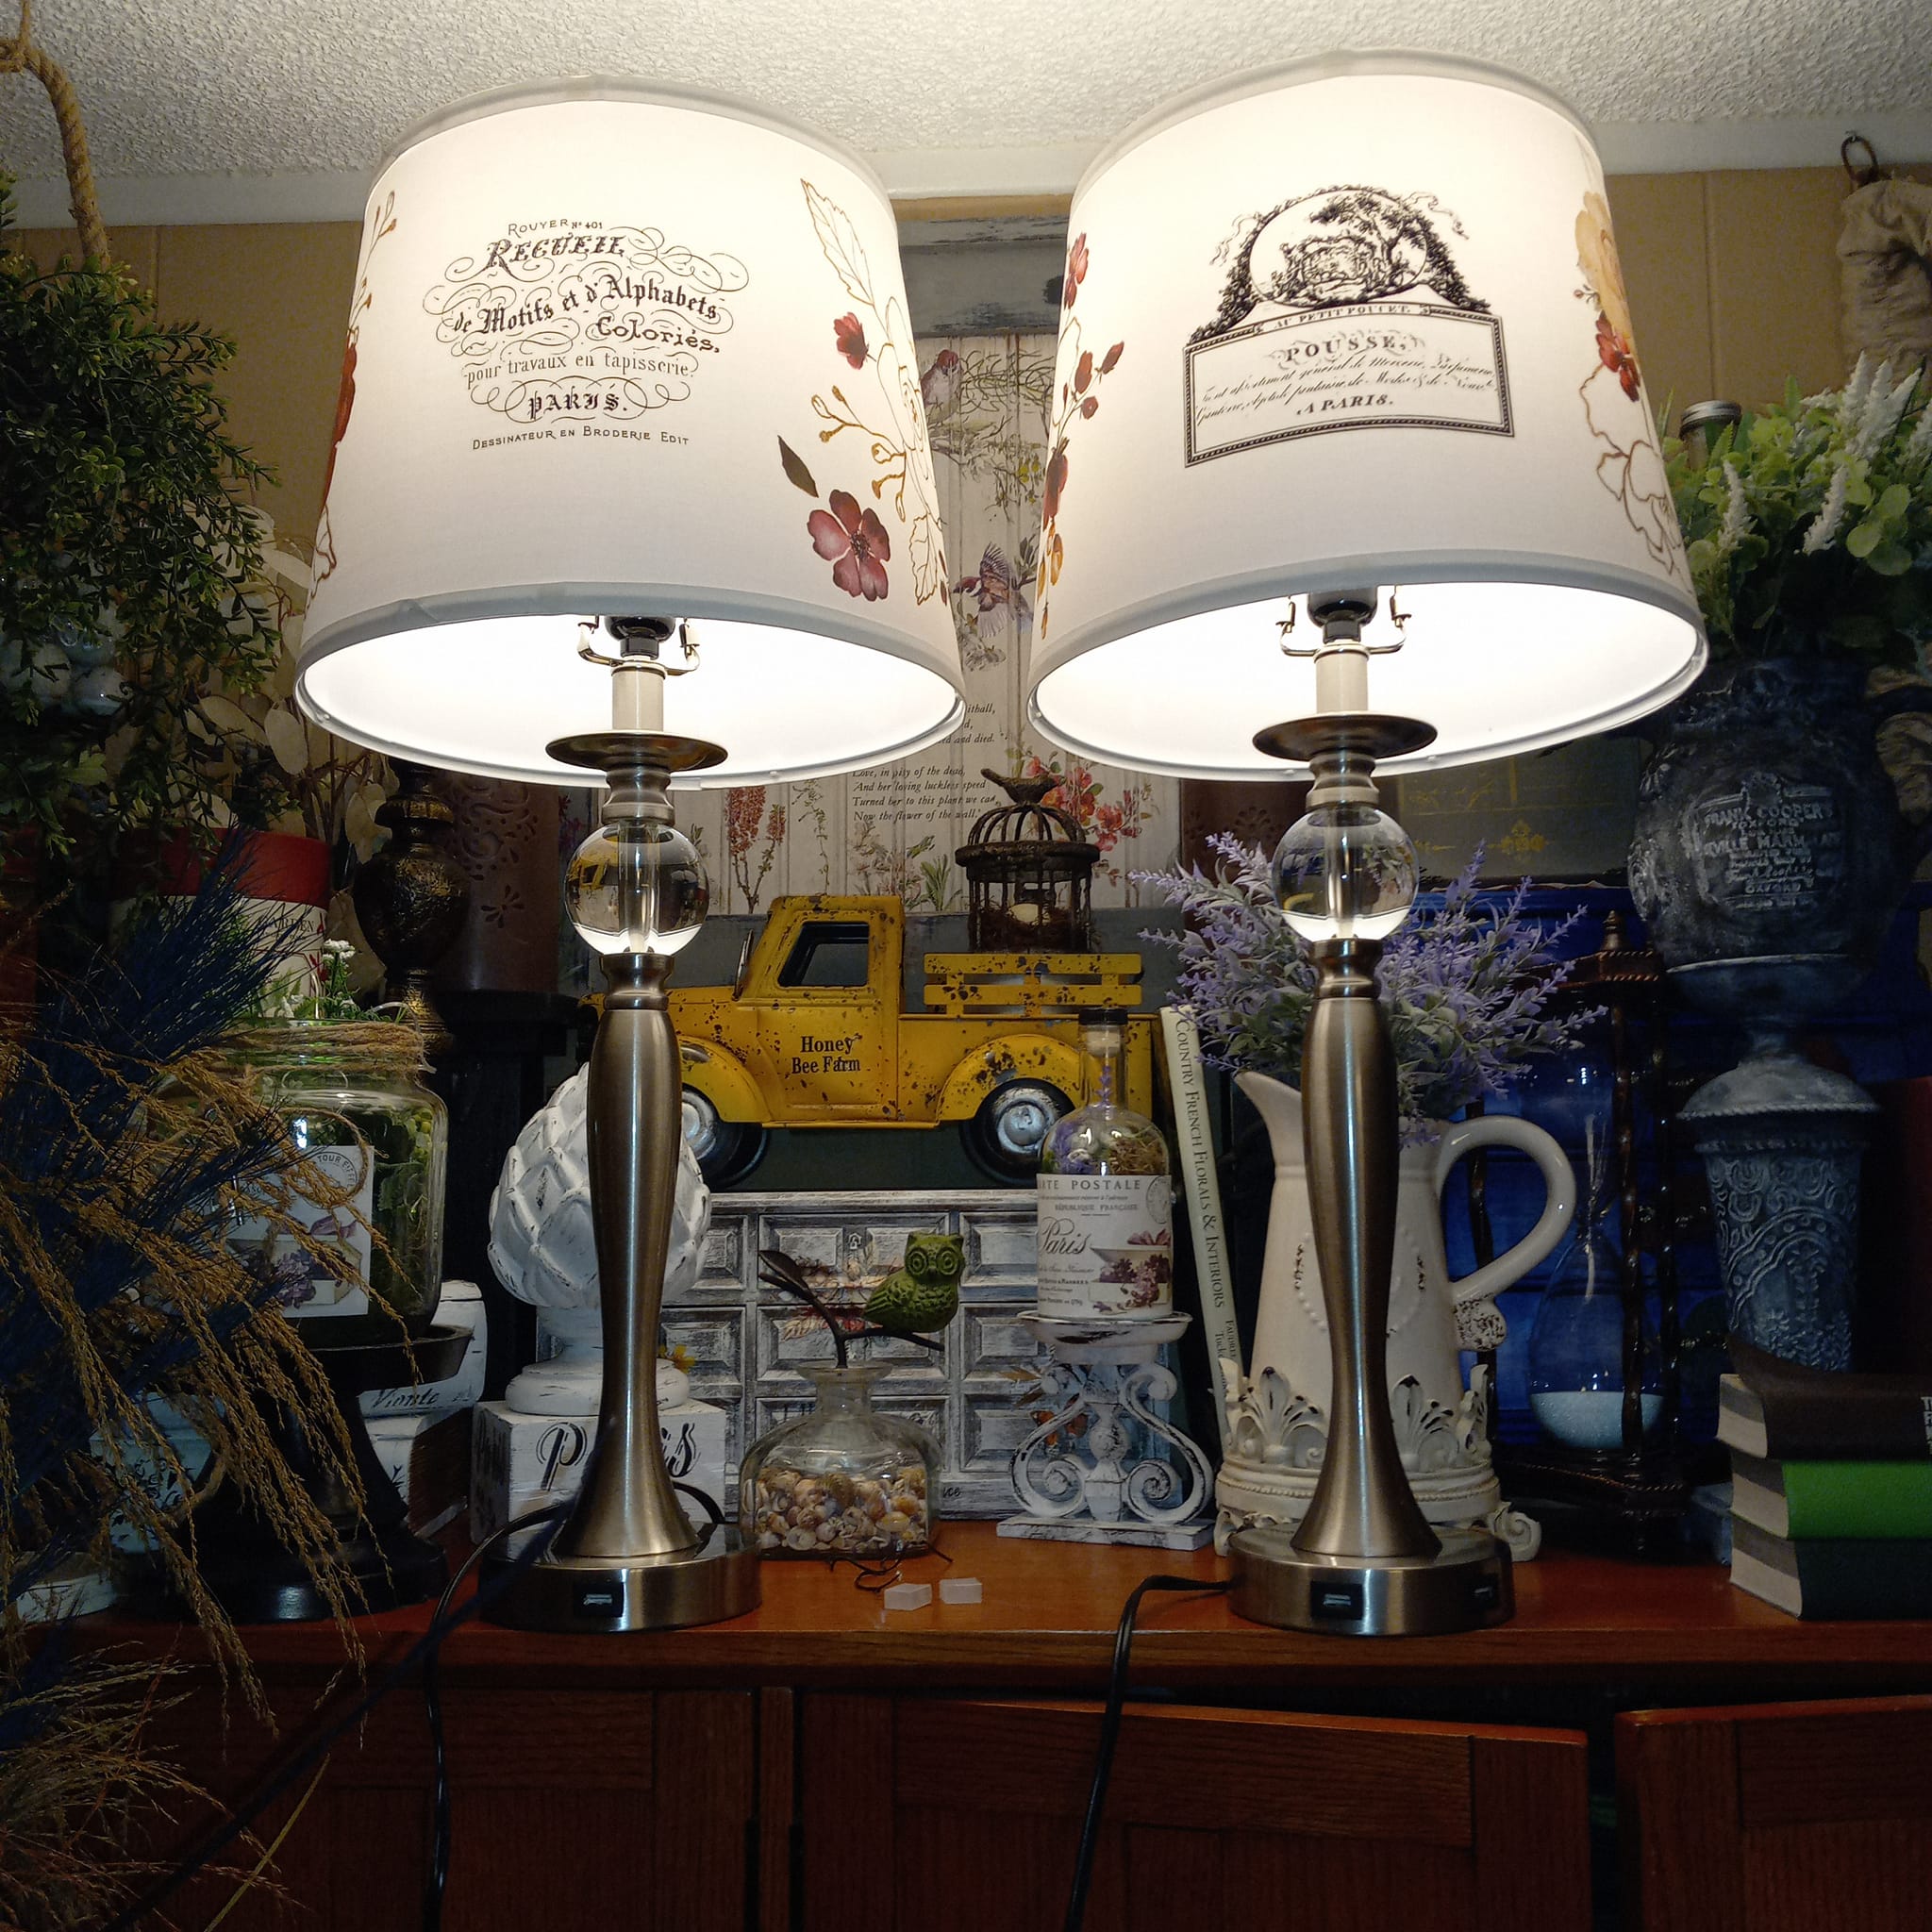 Two smll table lamps refurbished by Xa Hughes feature ReDesign with Prima's Classic Vintage Labels on their white lampshades.